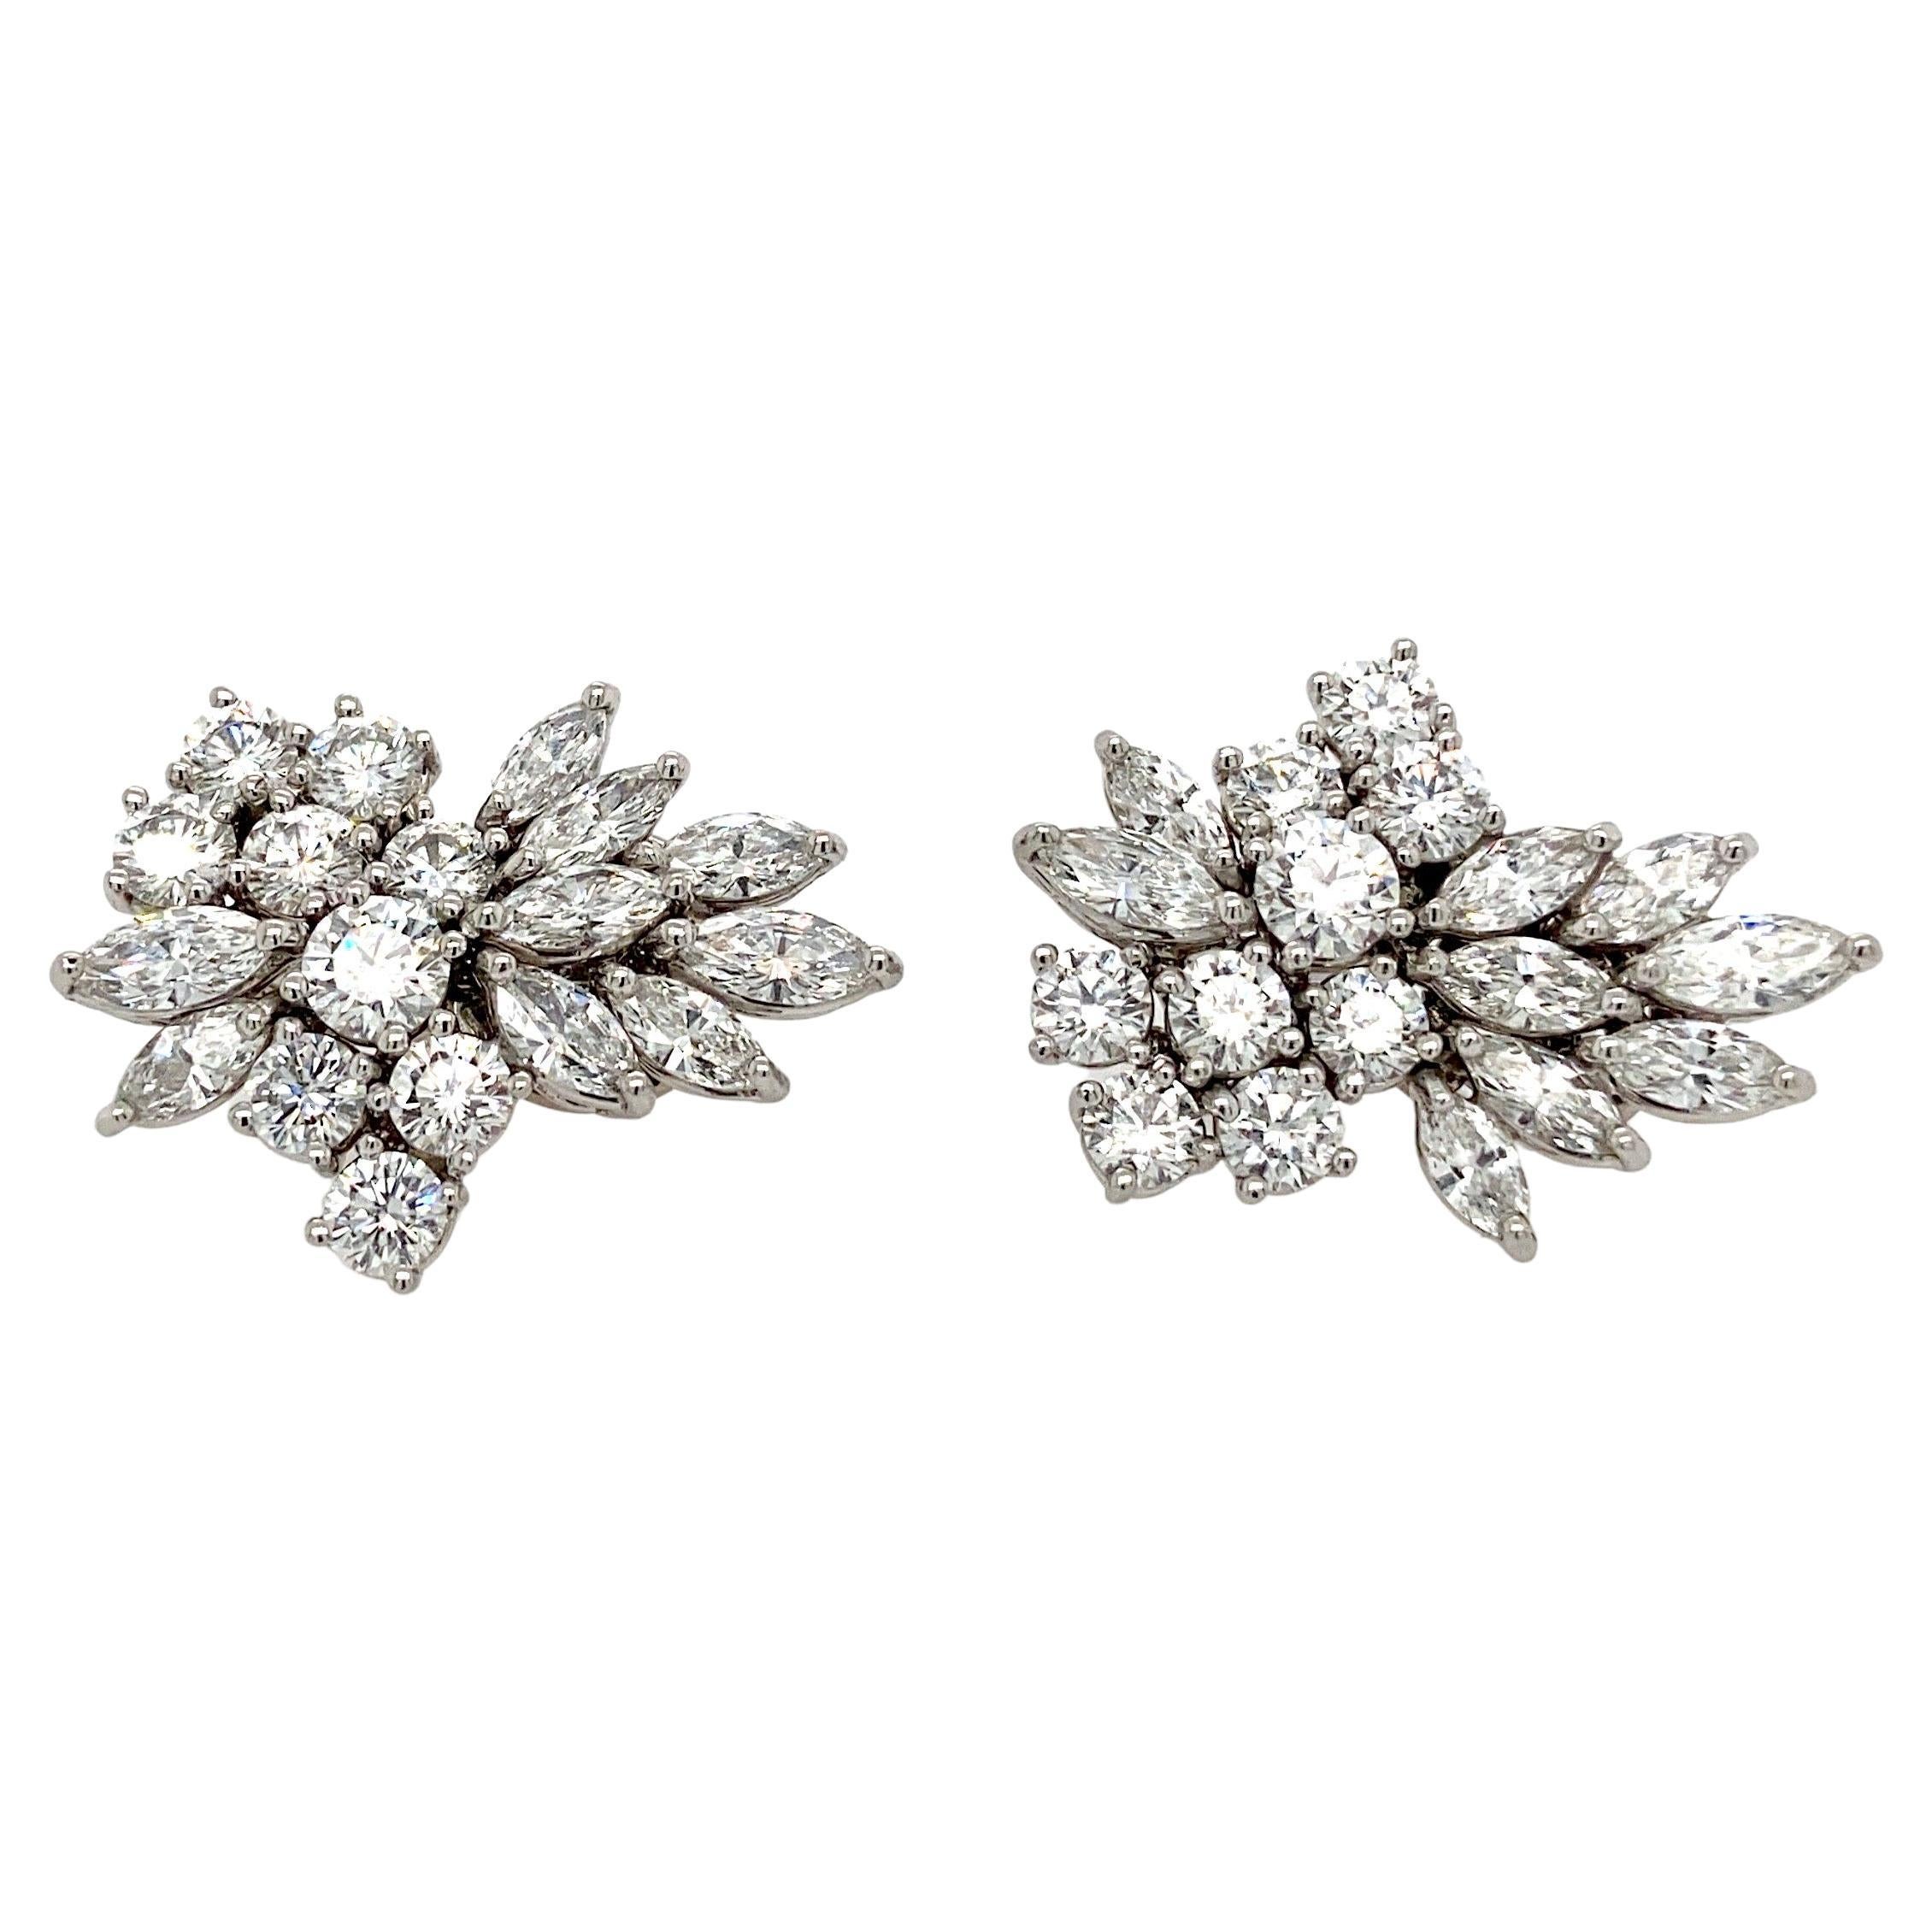 Kwiat Platinum 8 Carat Diamond Earrings Marquise and Round Cut